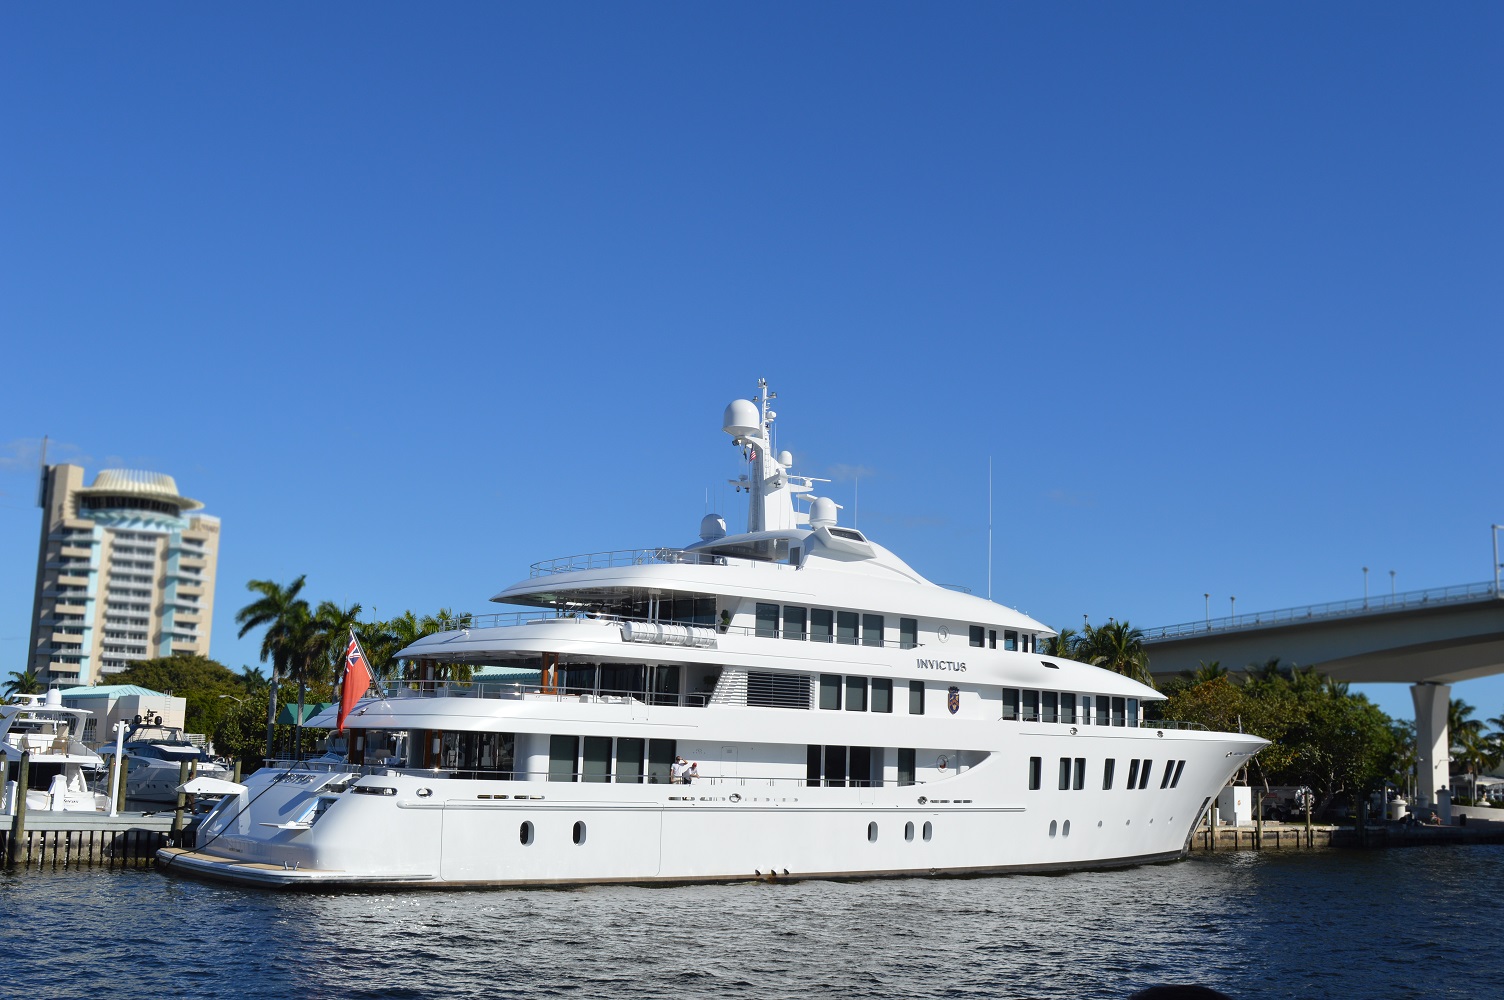 <p>When <em>Invictus</em> hit the waves in 2013, it was one of the biggest yachts in the world. It's 2000GT interior is spacious, outfitted with Art Deco fixtures and exotic woods, and its Sky Lounge converts into a Parisian nightclub.</p>